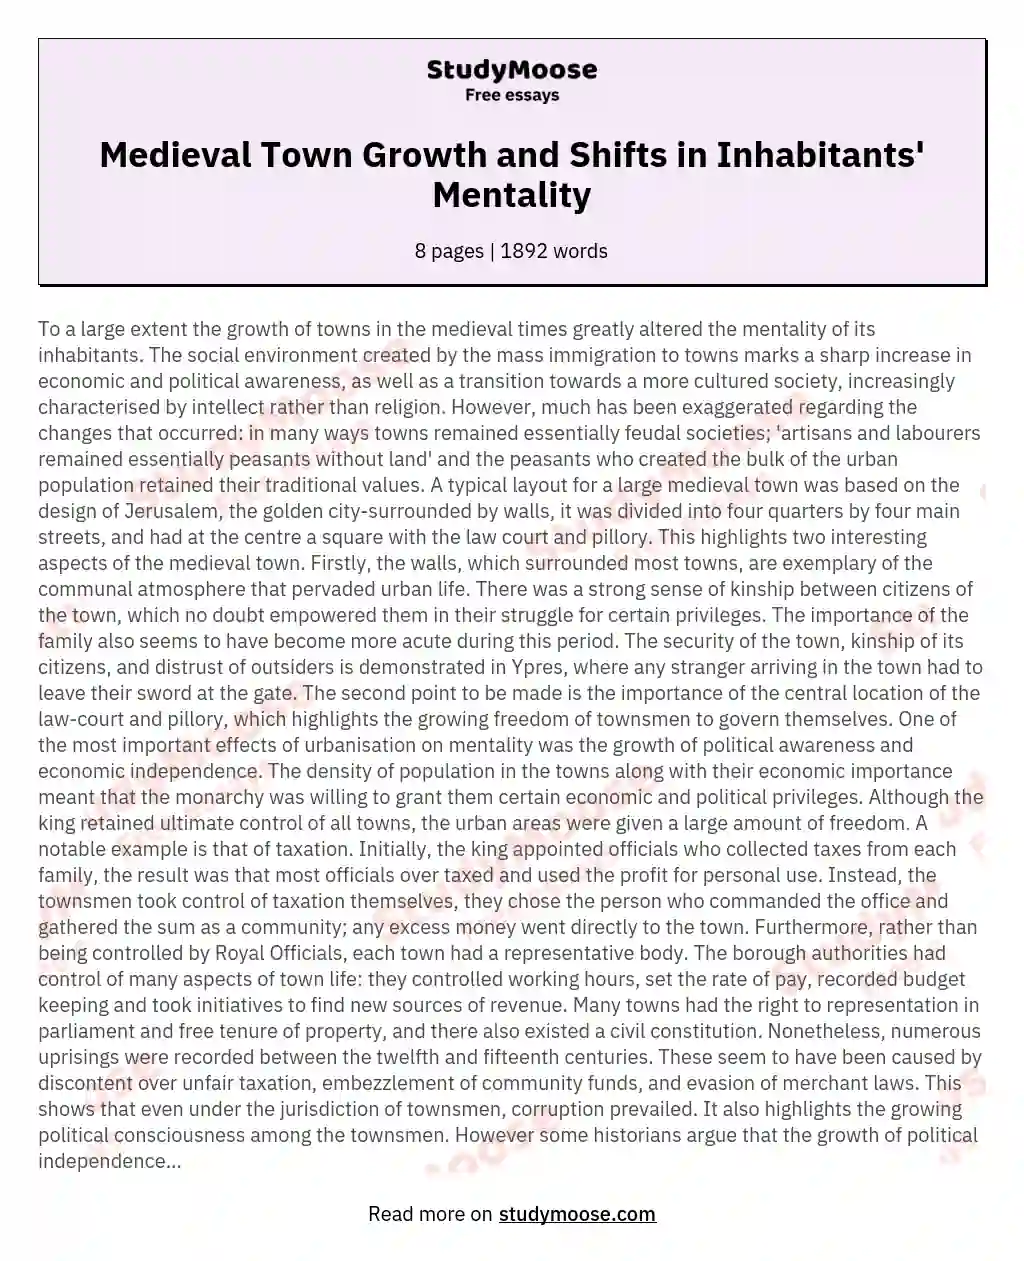 How the Growth of Medieval Towns Greatly Altered the Mentality of Its Inhabitants